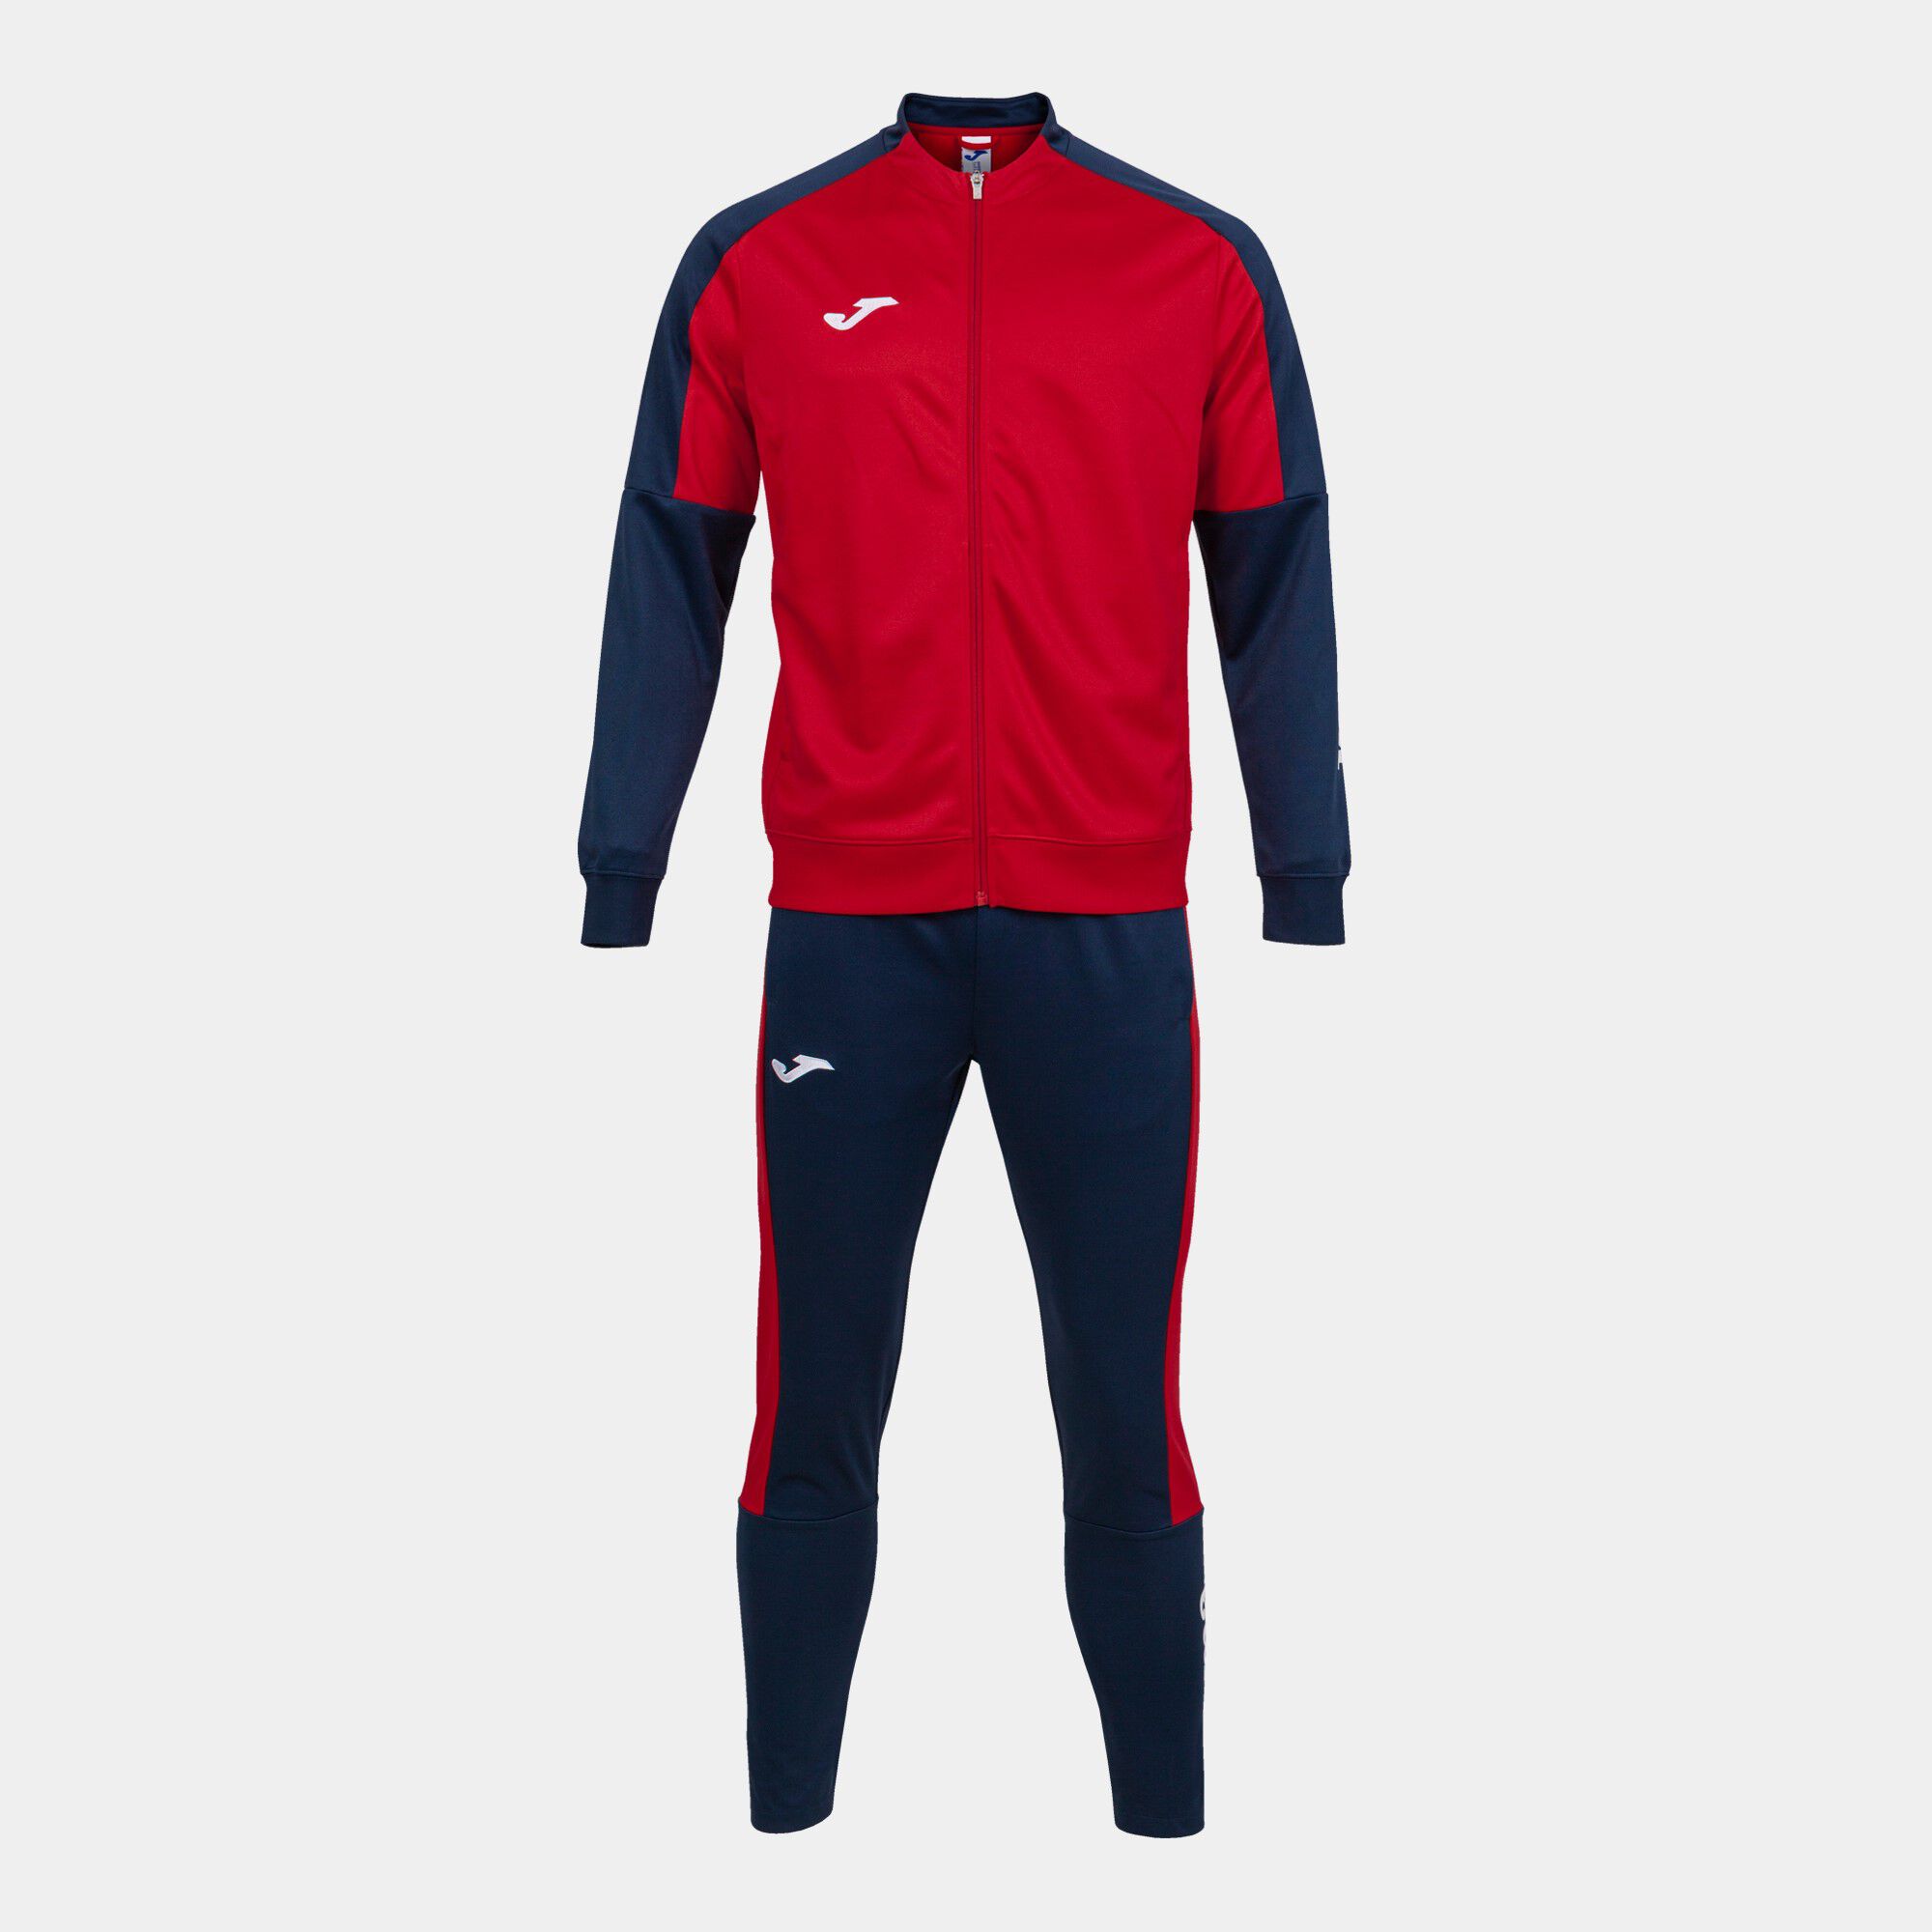 Tracksuit man Eco Championship red navy blue